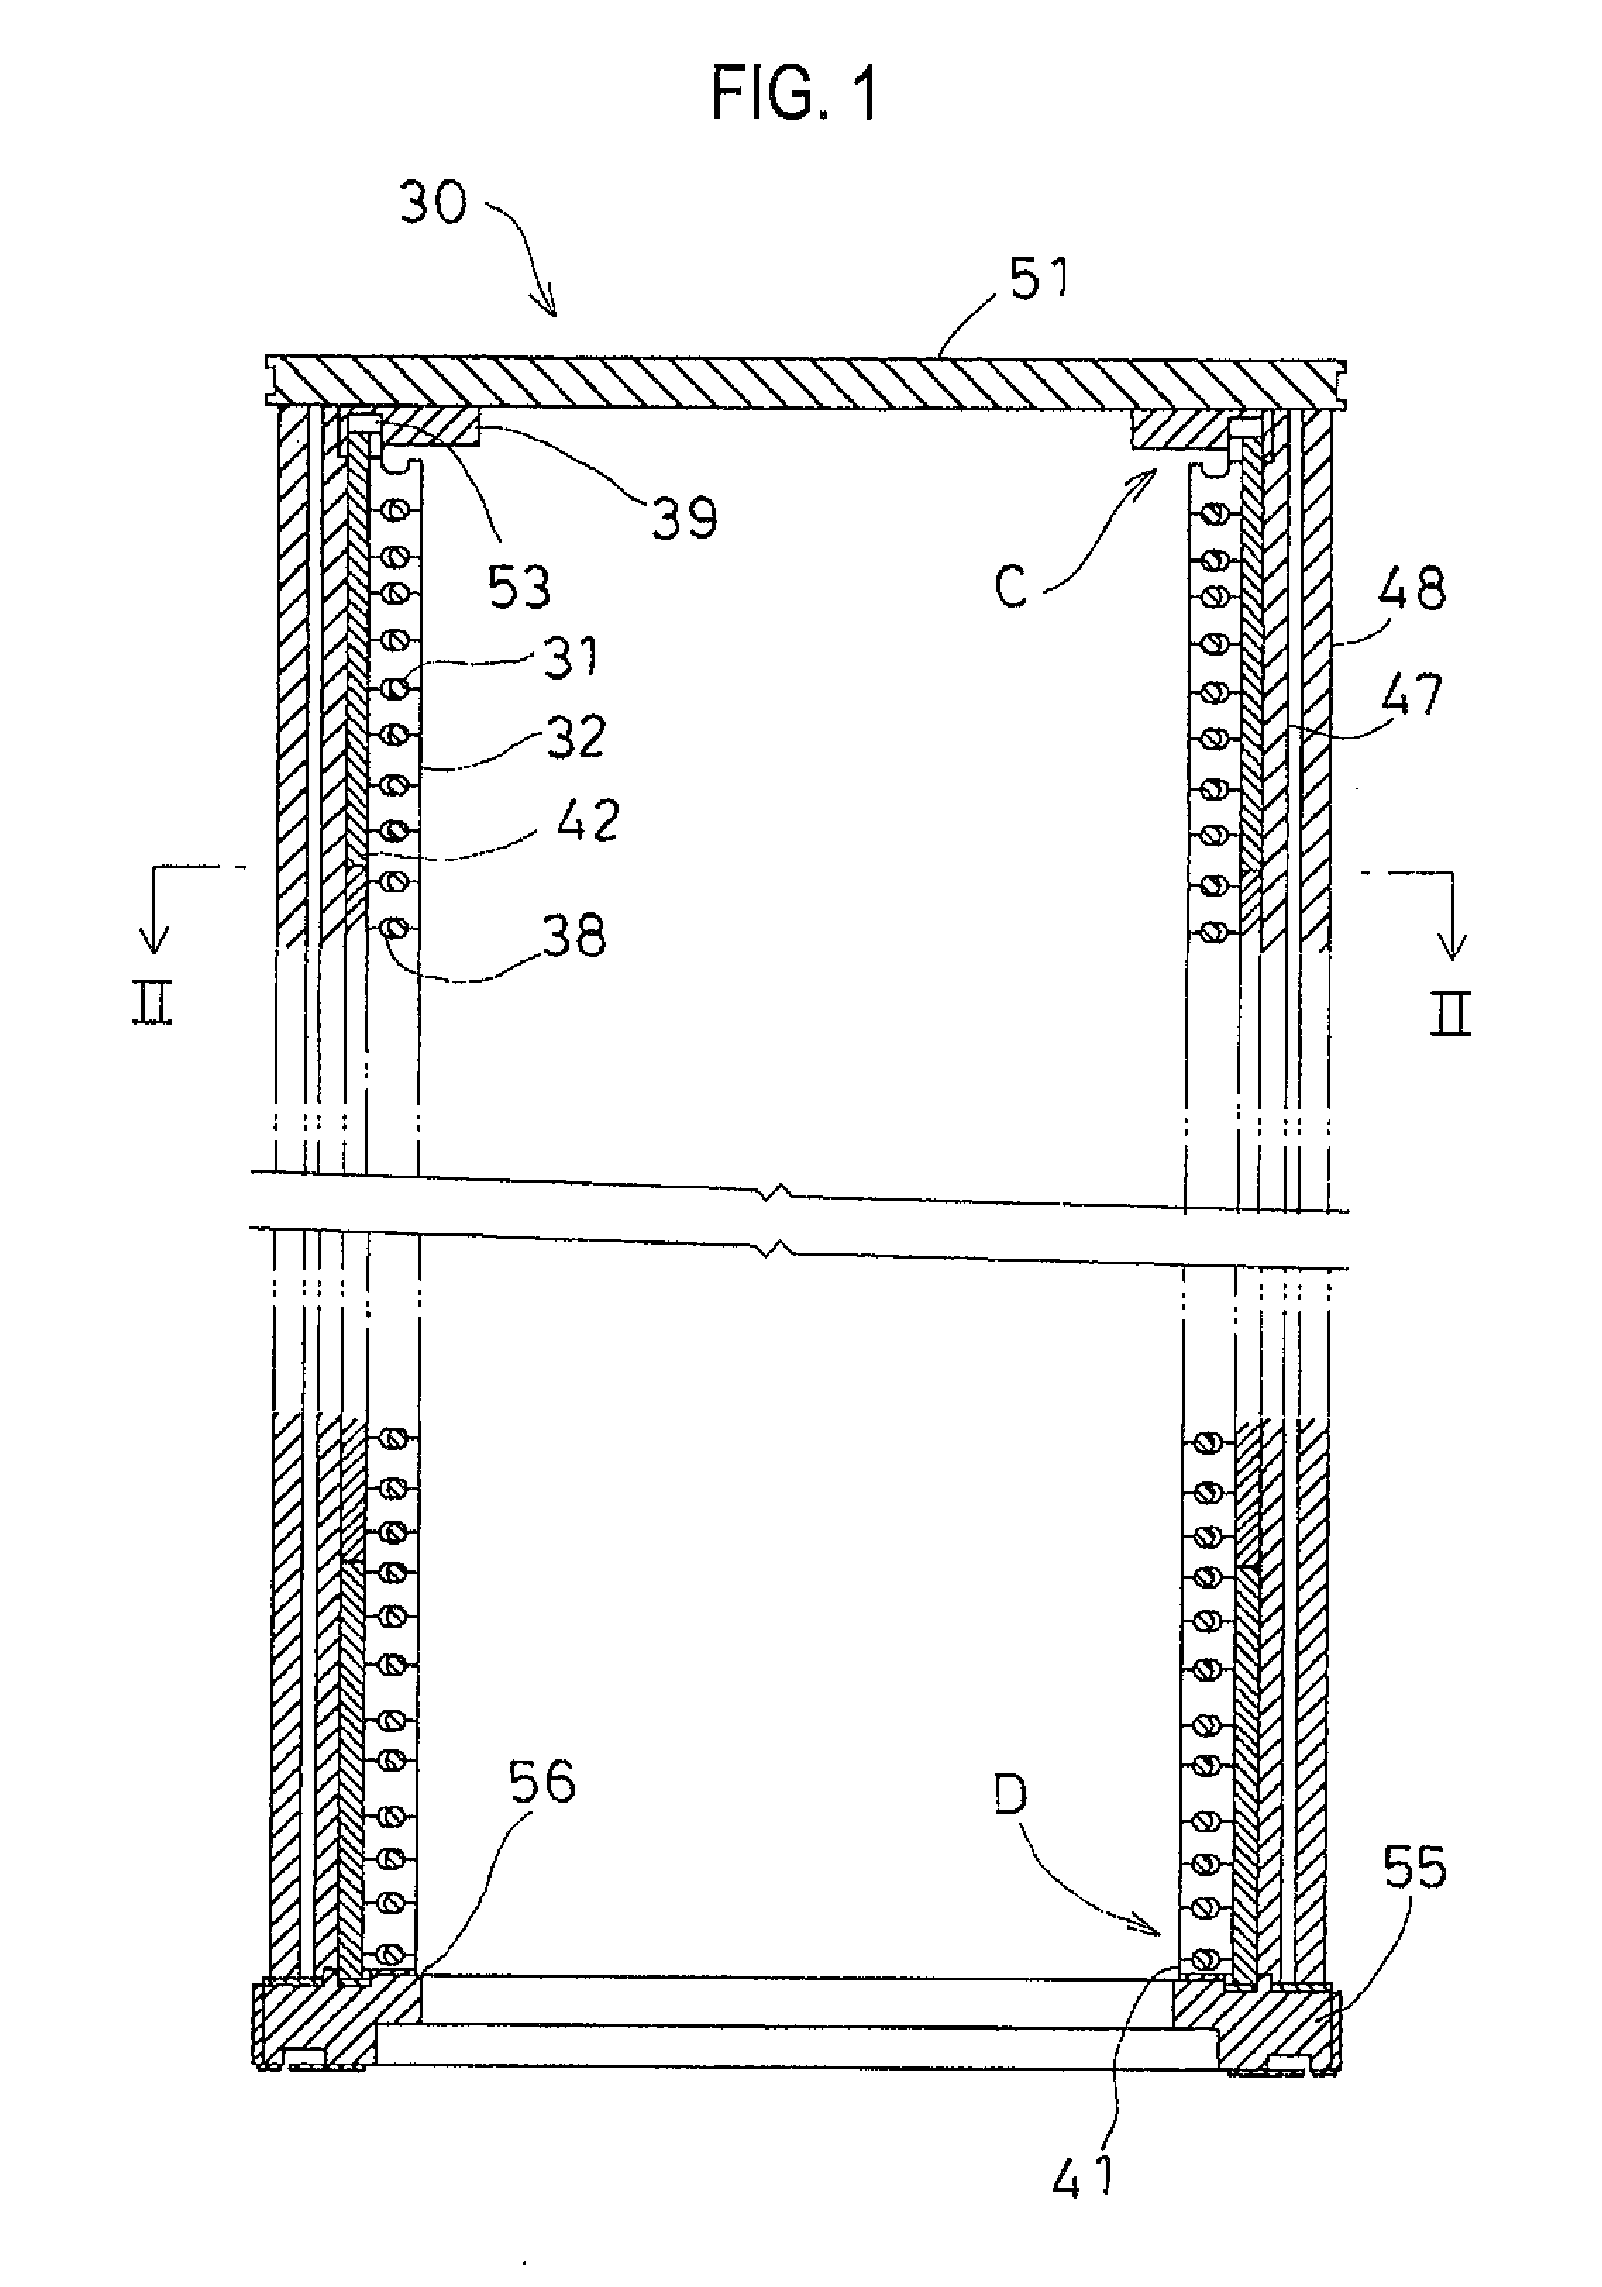 Heater supporting device